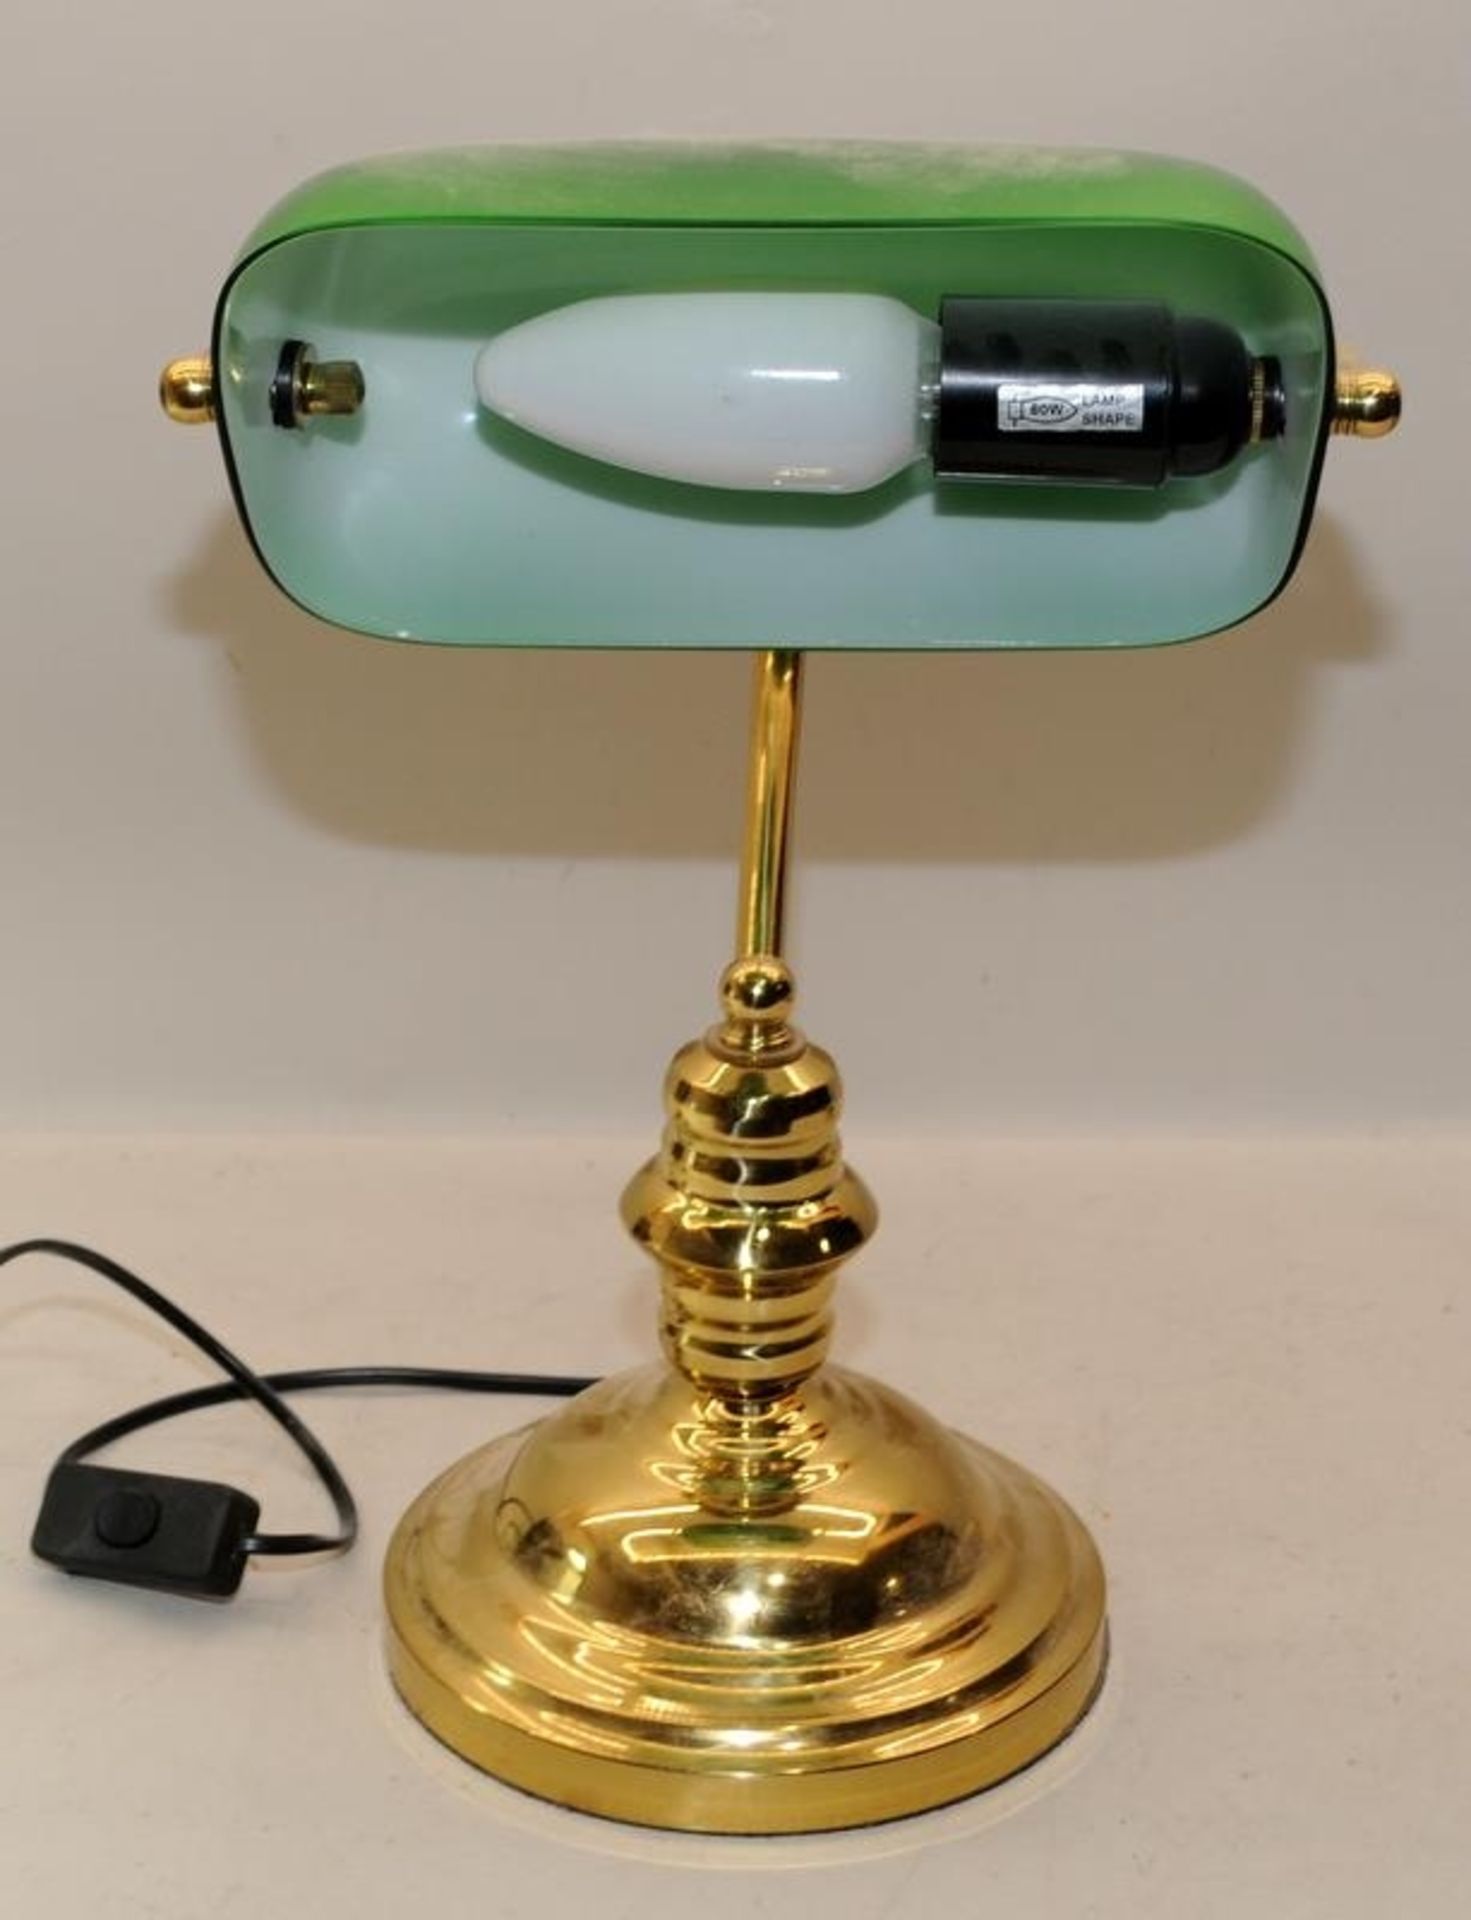 Vintage brass bankers desk lamp with green shade, approx 33cms tall - Image 3 of 3